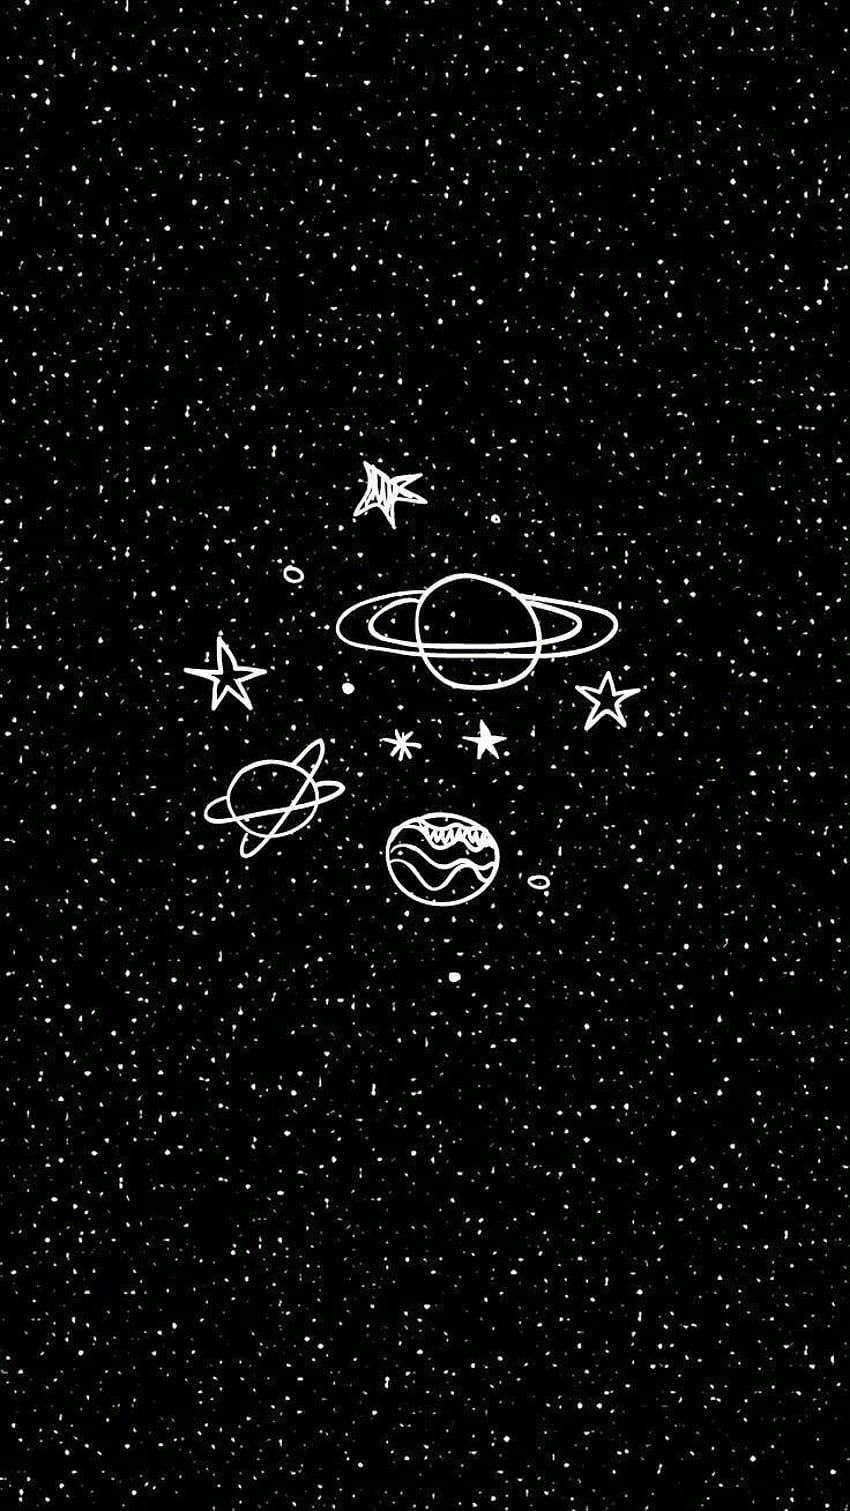 Black aesthetic wallpaper for phone with stars and planets - Constellation, galaxy, space, doodles